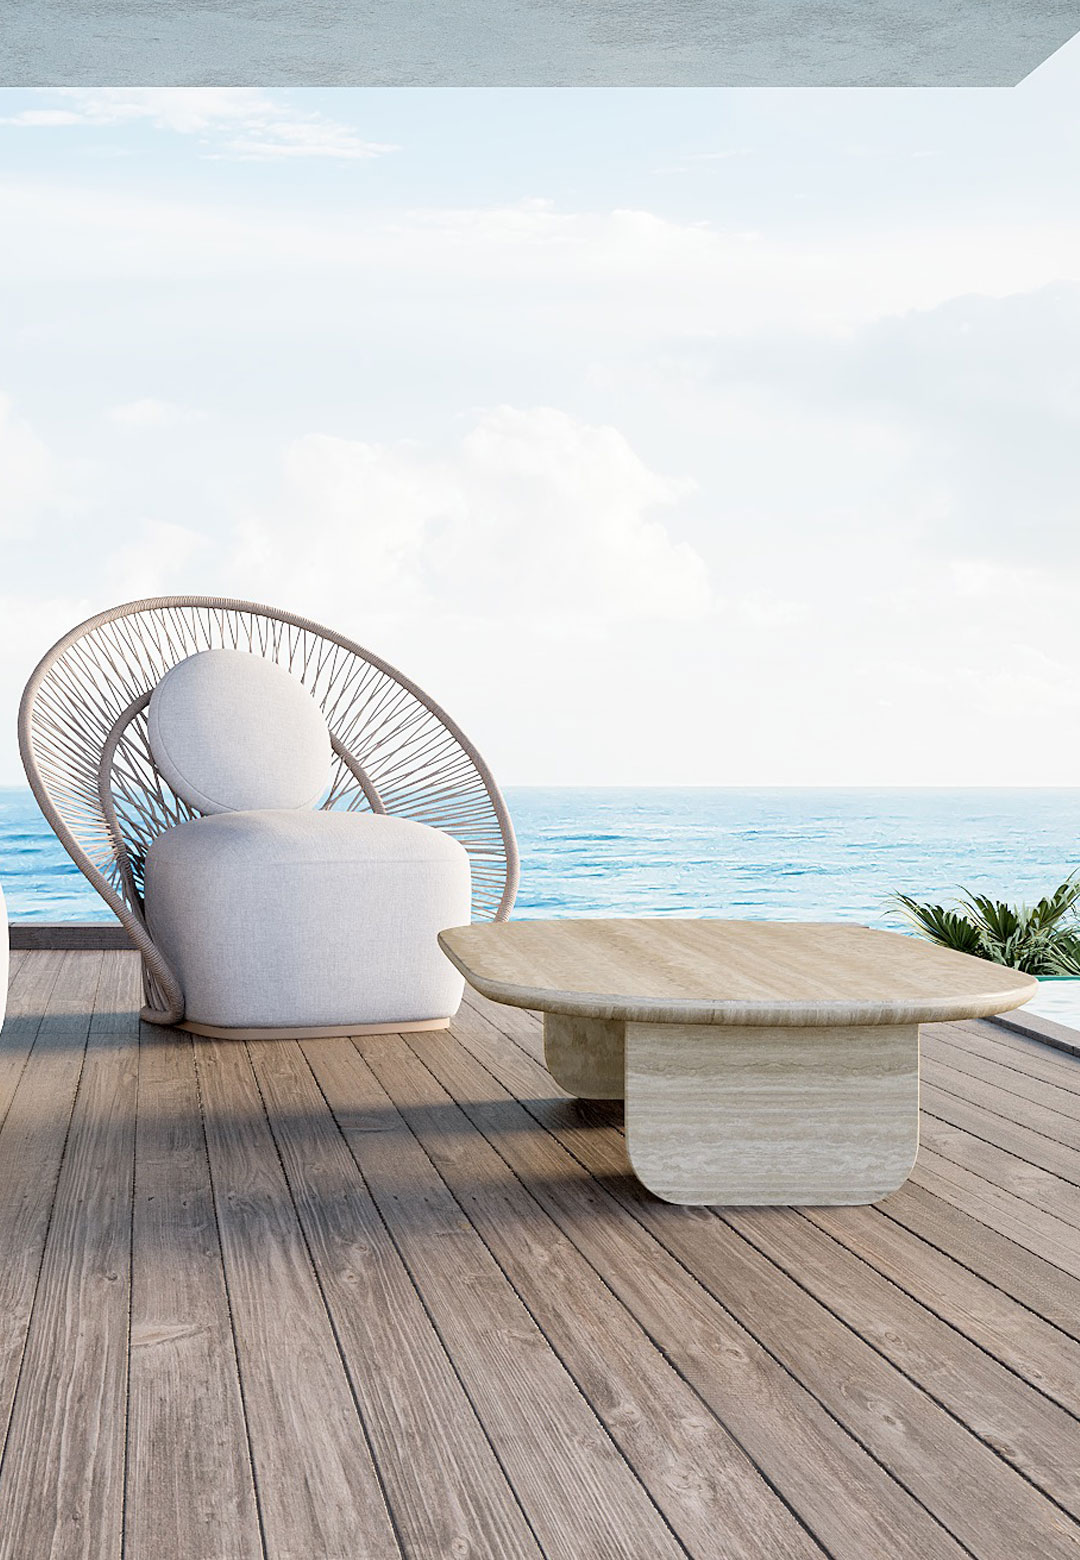 Marcel Wanders studio’s ‘Maui’ takes cues from tropical landscapes